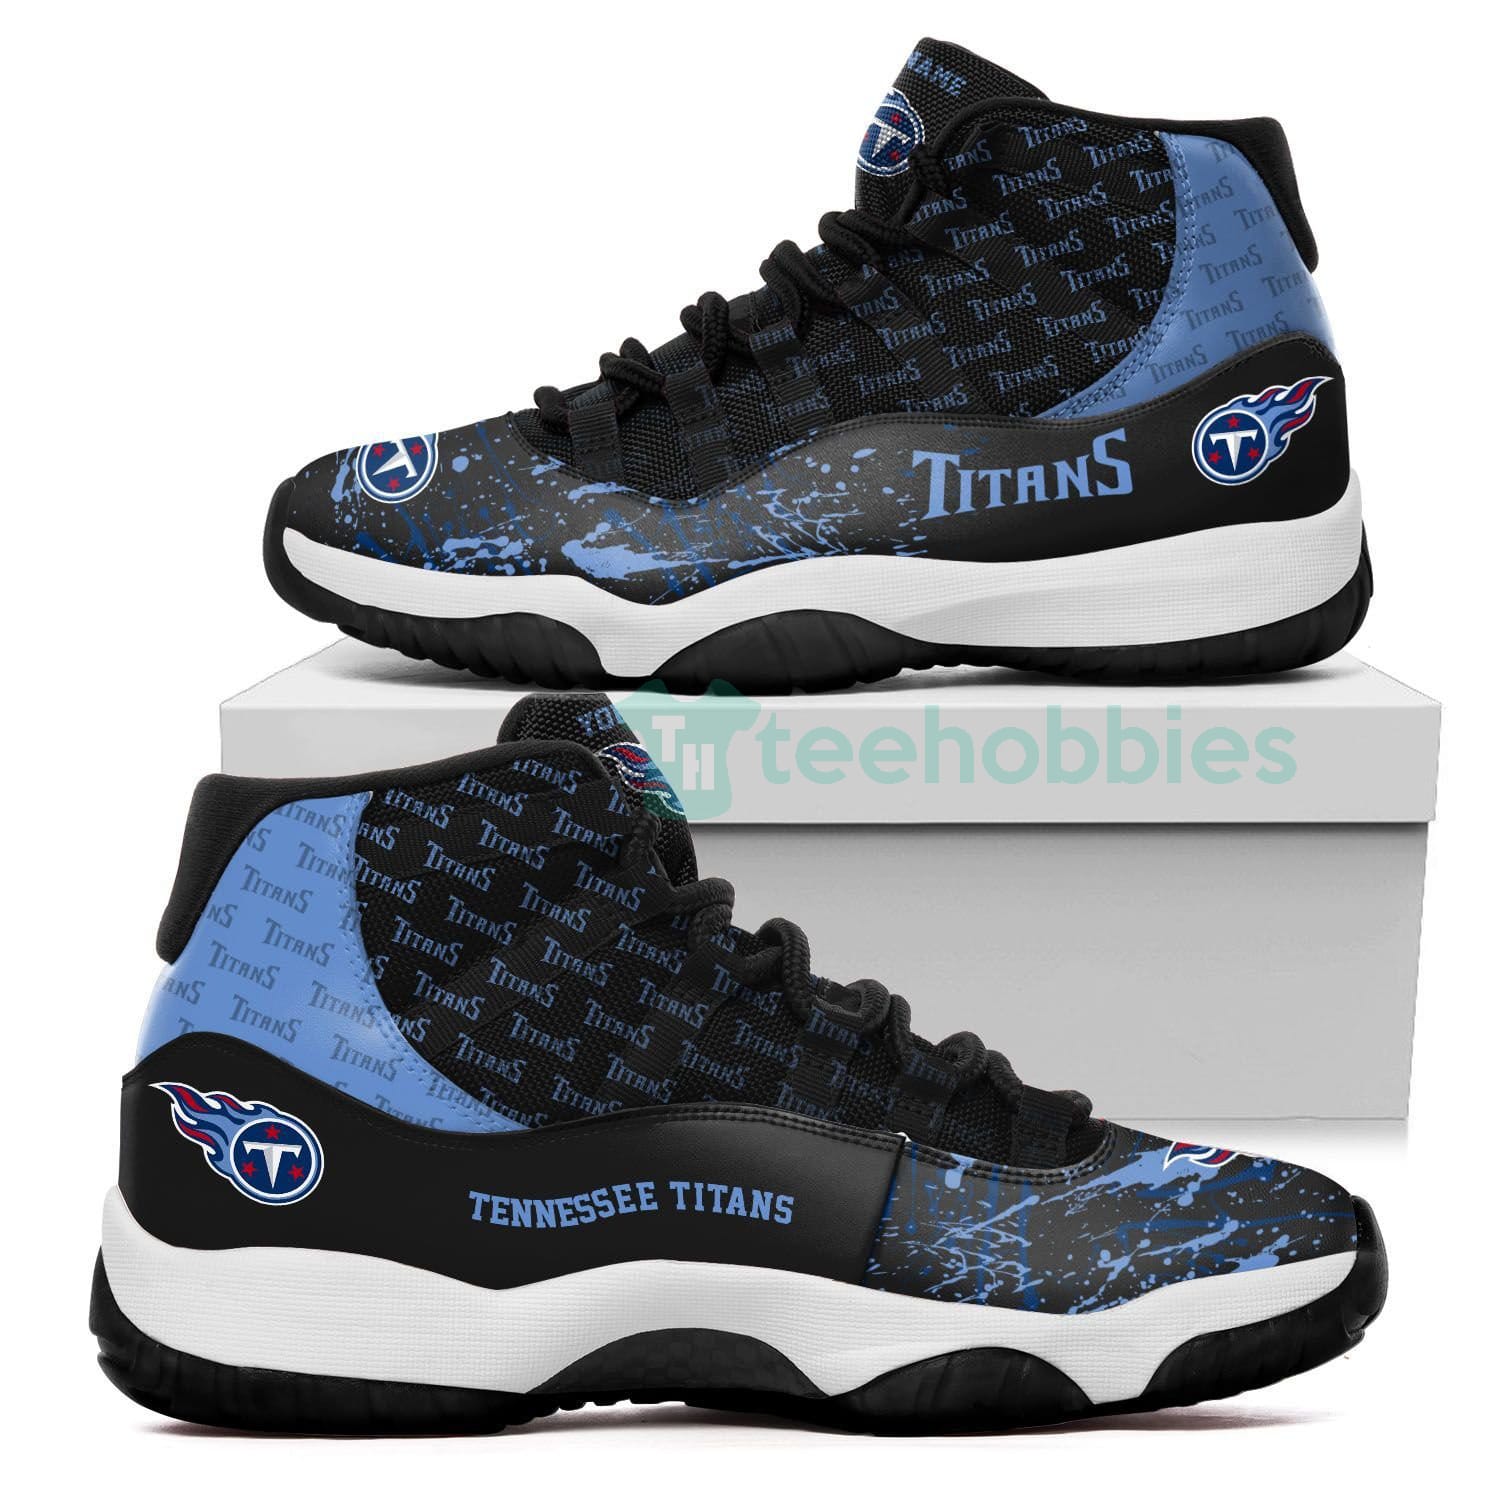 Tennessee Titans Customized New Air Jordan 11 Shoes